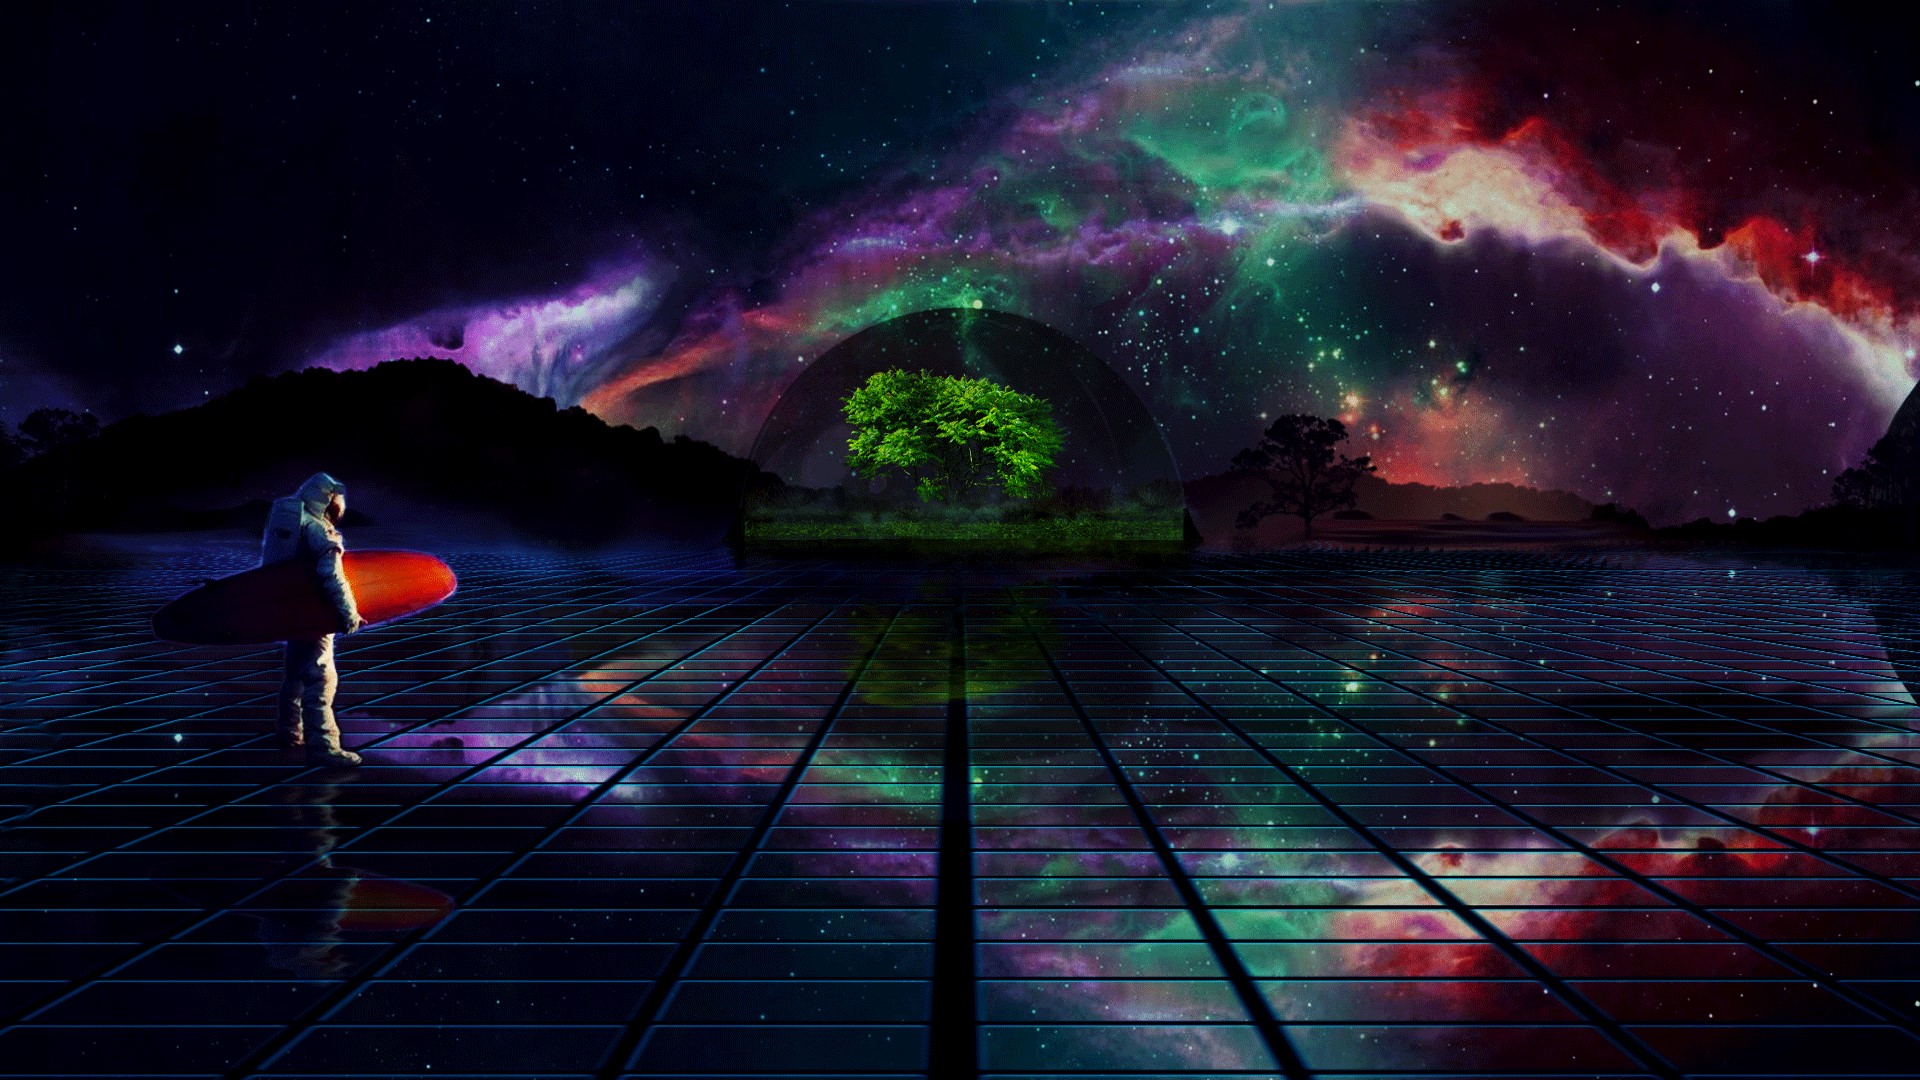 Space Trees Astronaut Surfboards Photo Manipulation Landscape 1920x1080